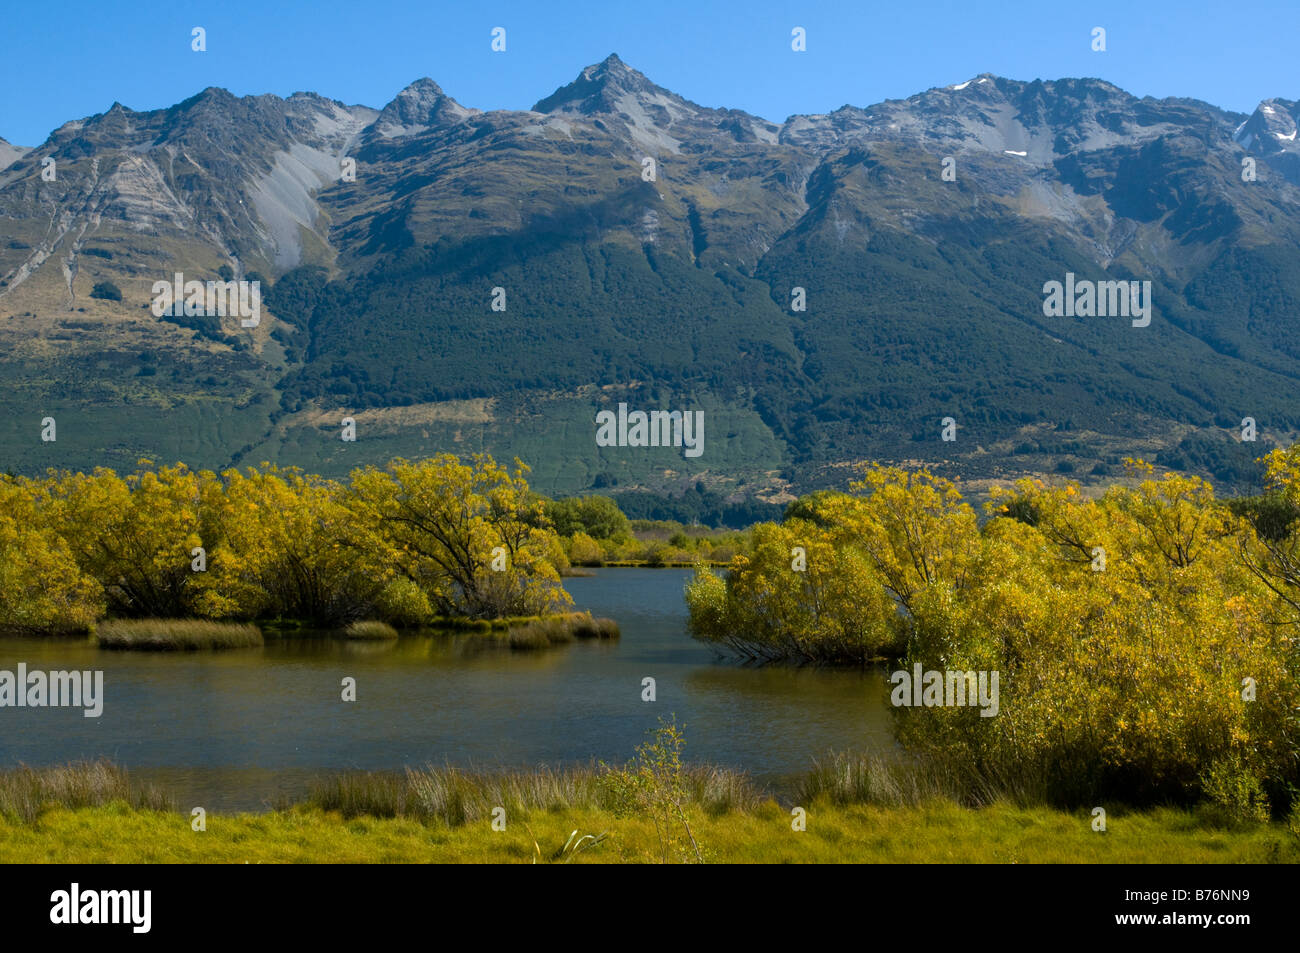 The Humboldt Mountains from the Lagoons, Glenorchy, South Island, New Zealand Stock Photo